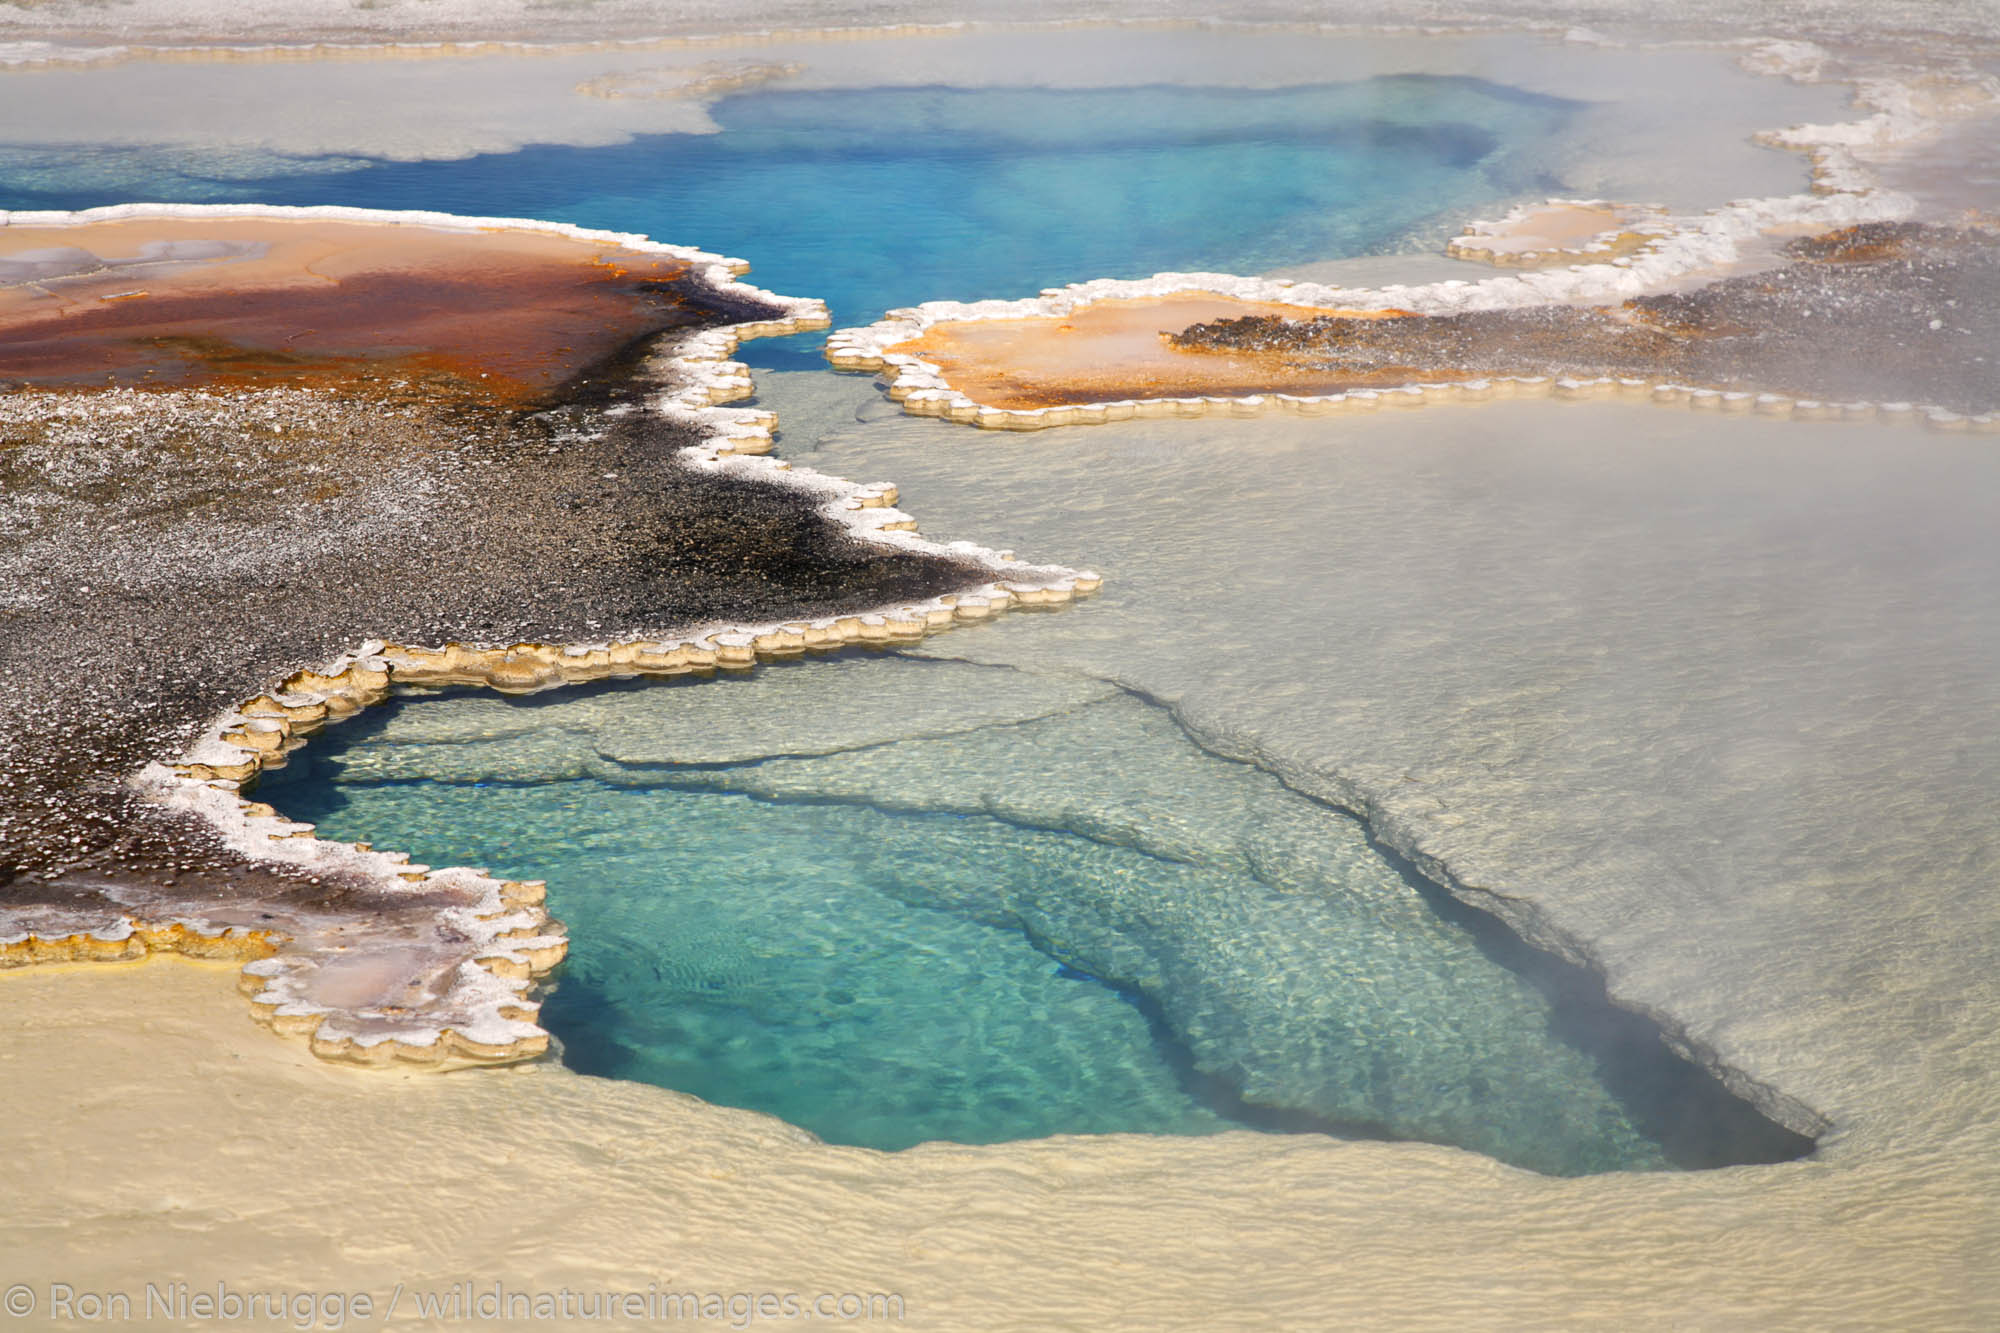 Doublet Pool, Upper Geyser Basin, Yellowstone National Park, Wyoming.